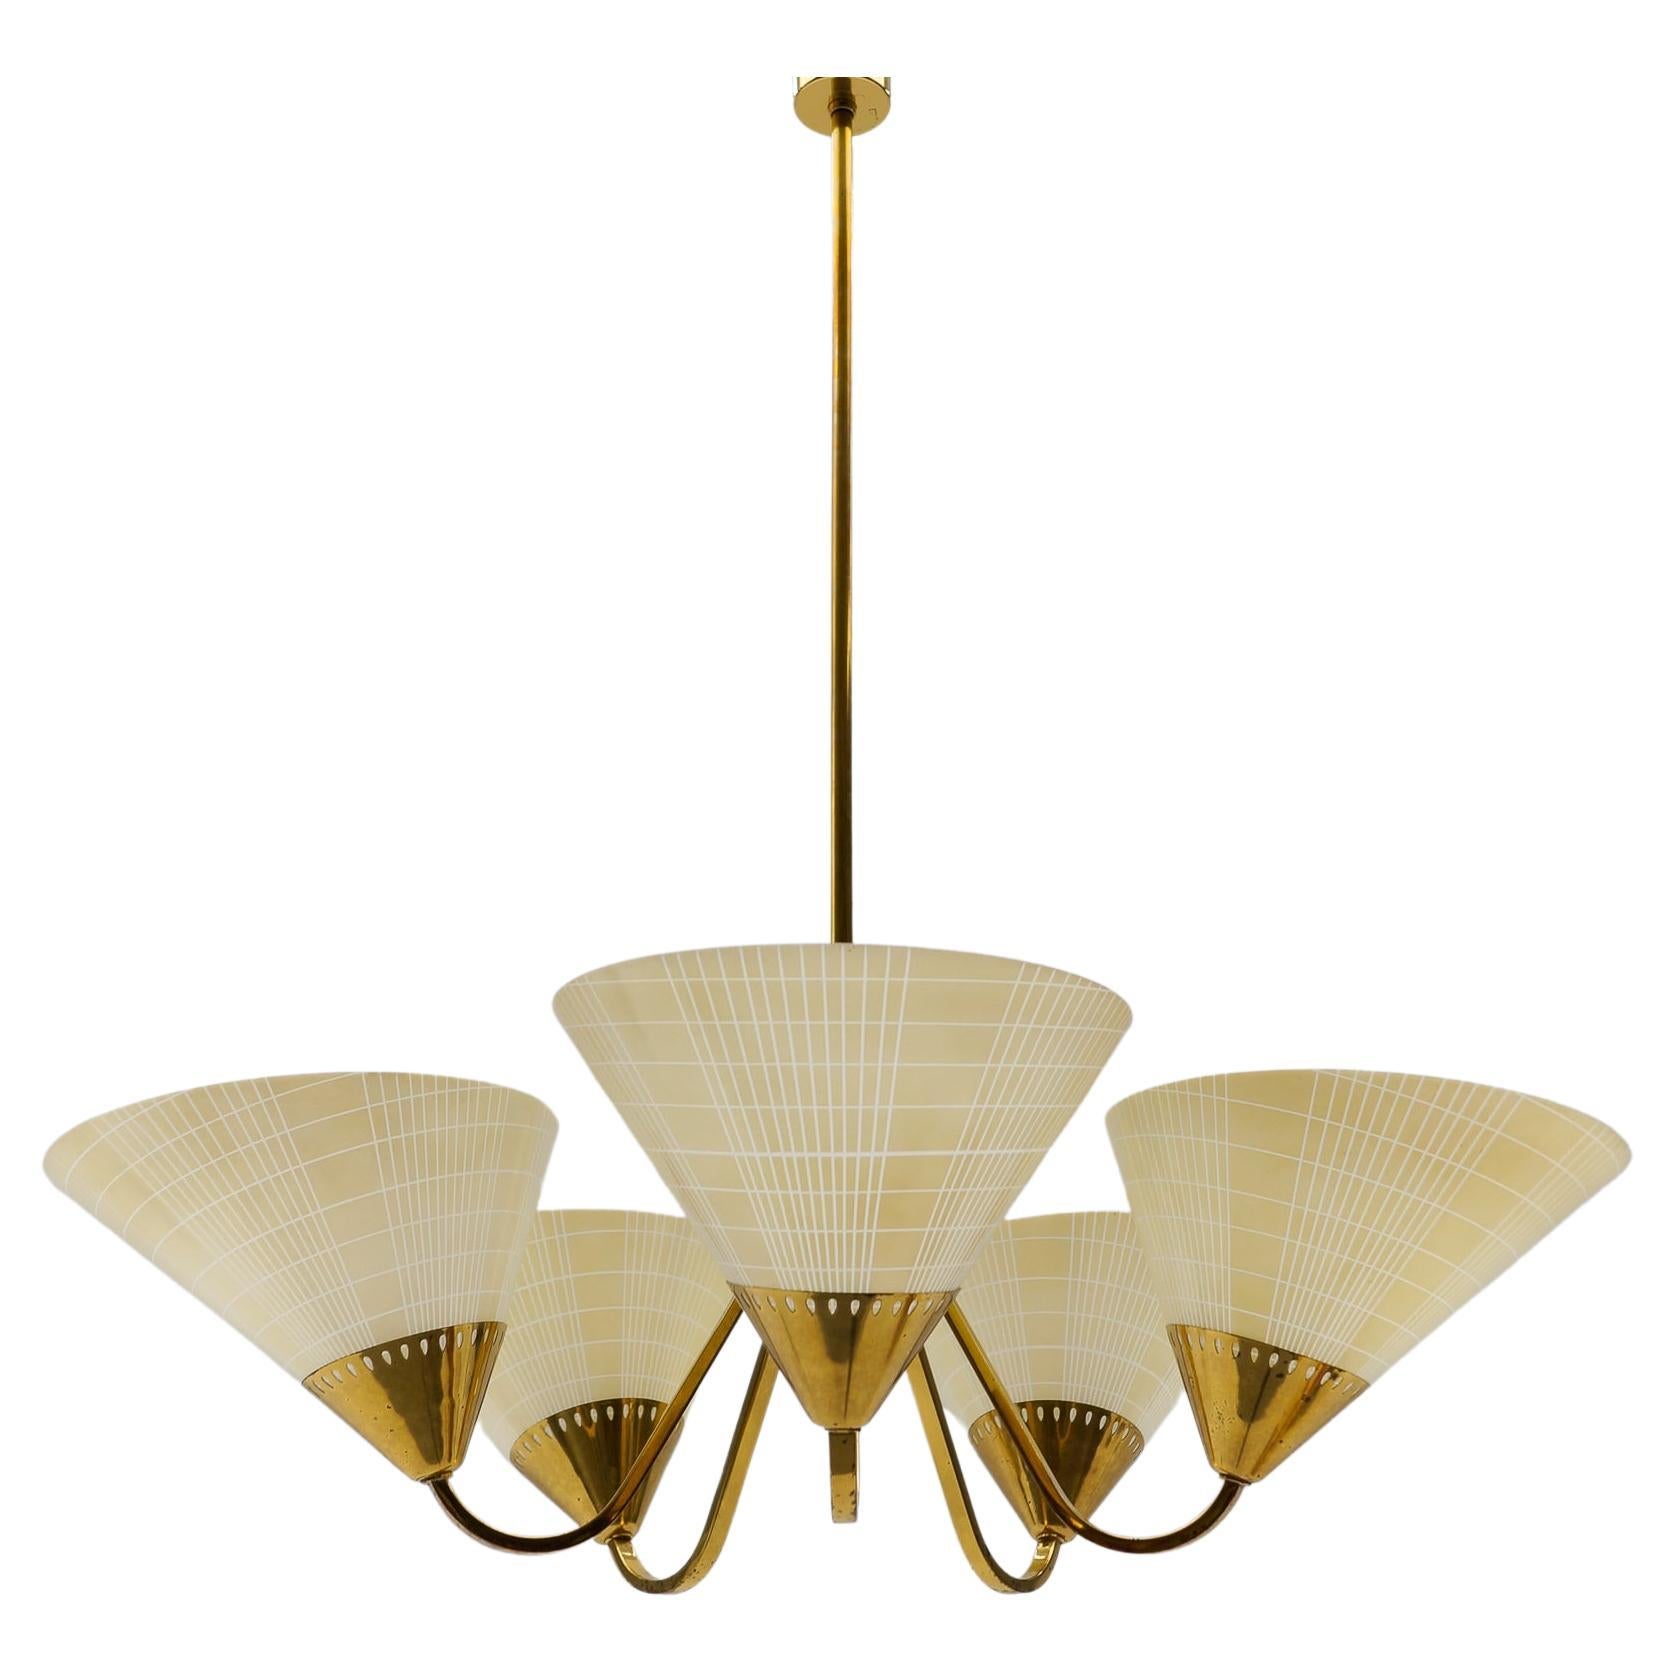 Awesome Mid-Century 5-Light Glass & Brass Ceiling Lamp, 1950s For Sale